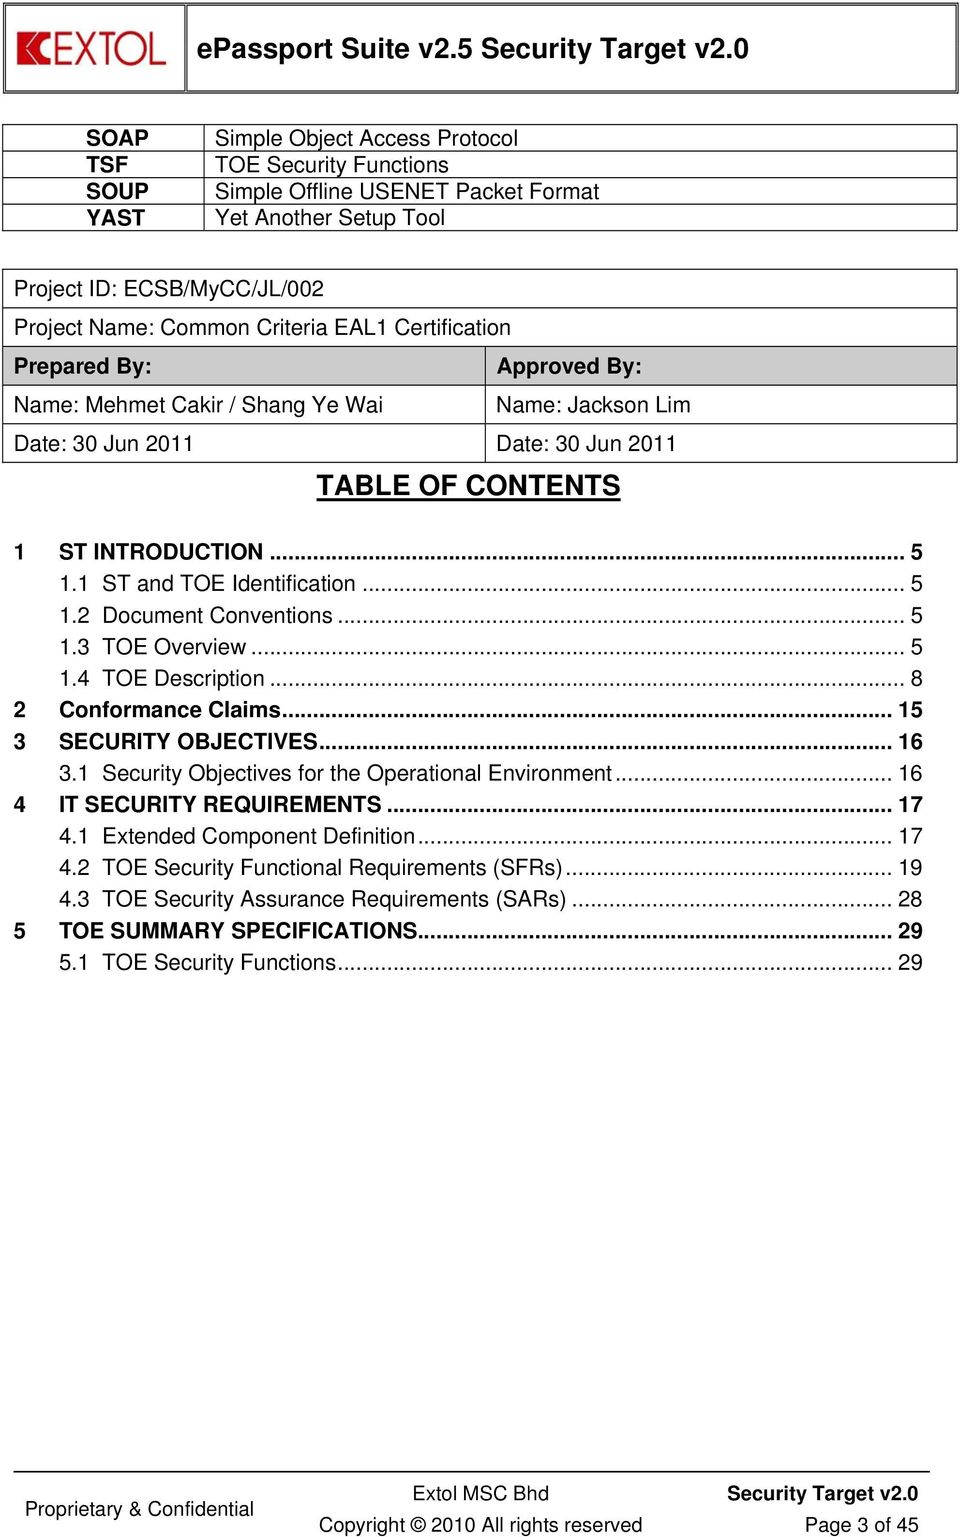 Certification Prepared By: Name: Mehmet Cakir / Shang Ye Wai Approved By: Name: Jackson Lim Date: 30 Jun 2011 Date: 30 Jun 2011 TABLE OF CONTENTS 1 ST INTRODUCTION... 5 1.1 ST and TOE Identification.